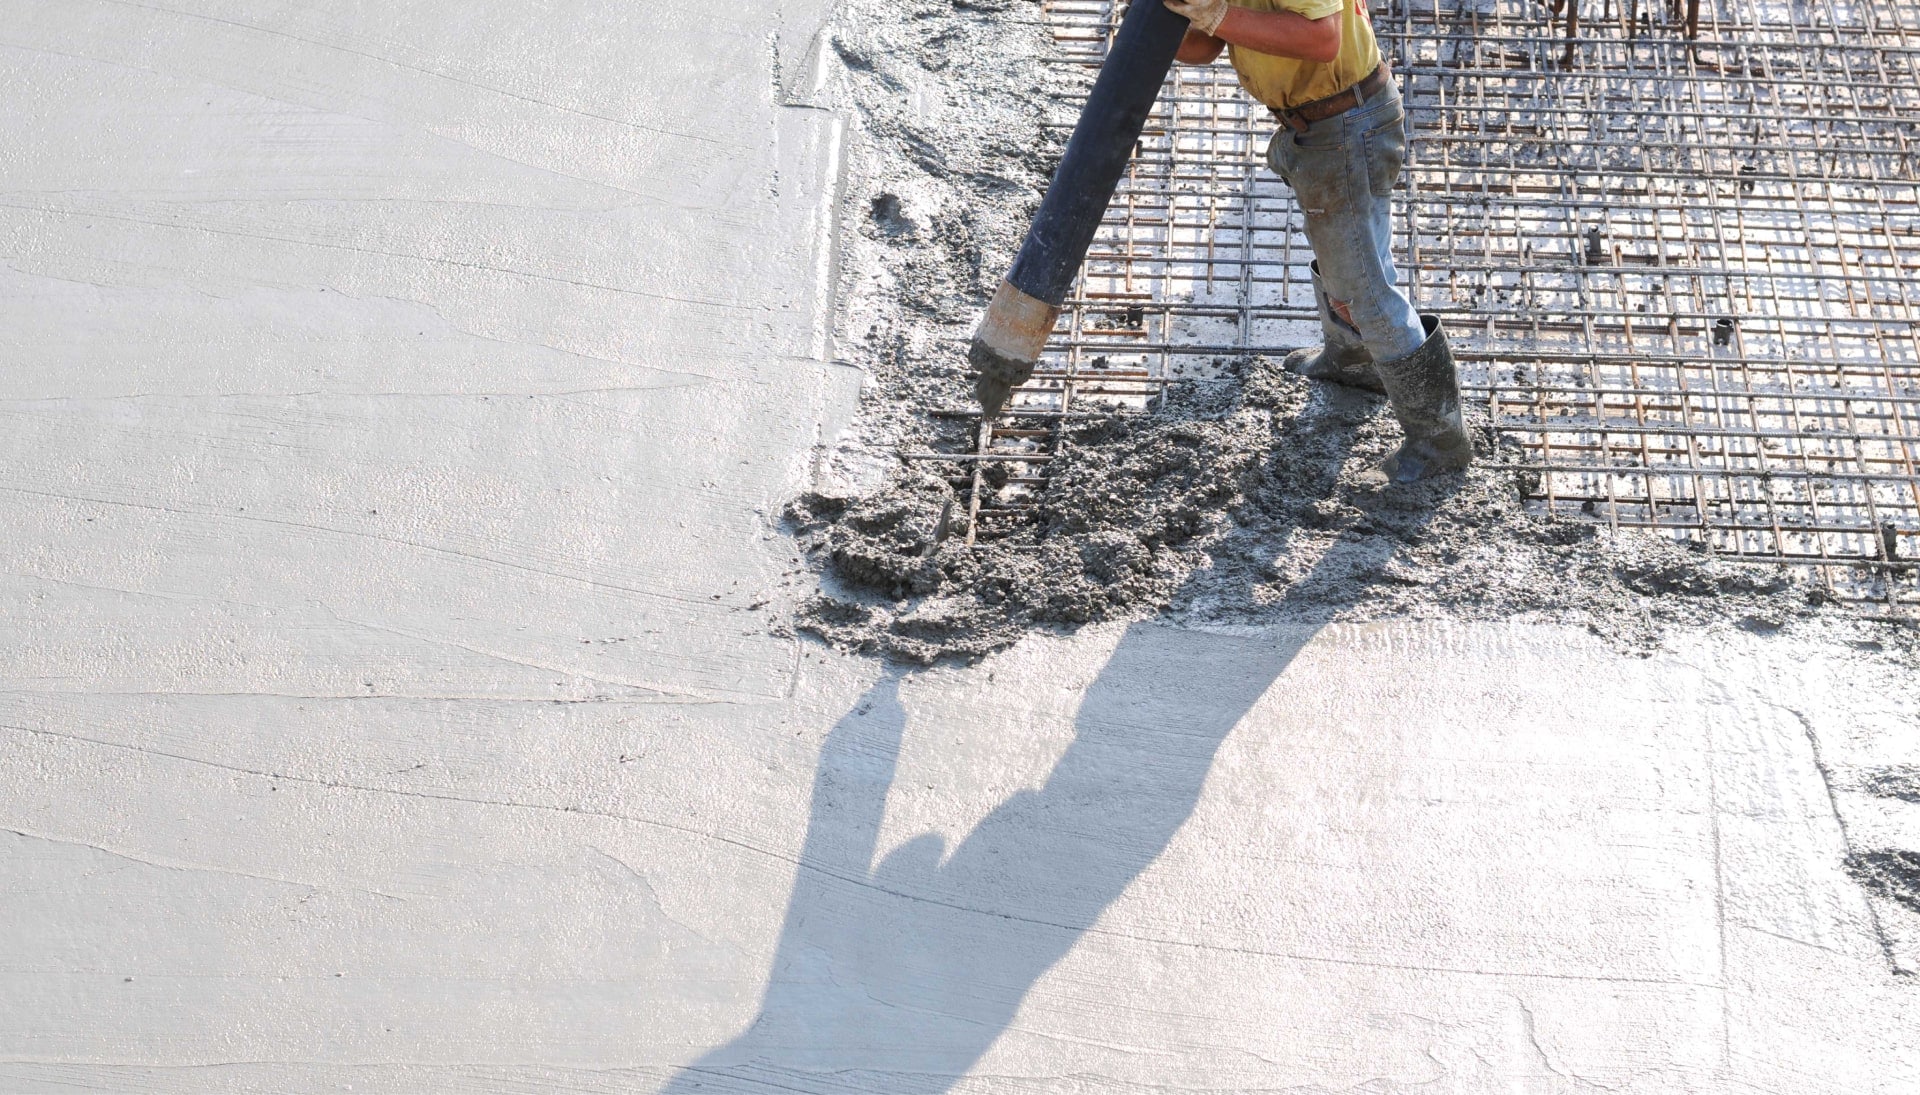 High-Quality Concrete Foundation Services Missoula, MT Trust Experienced Contractors for Strong Concrete Foundations for Residential or Commercial Projects.